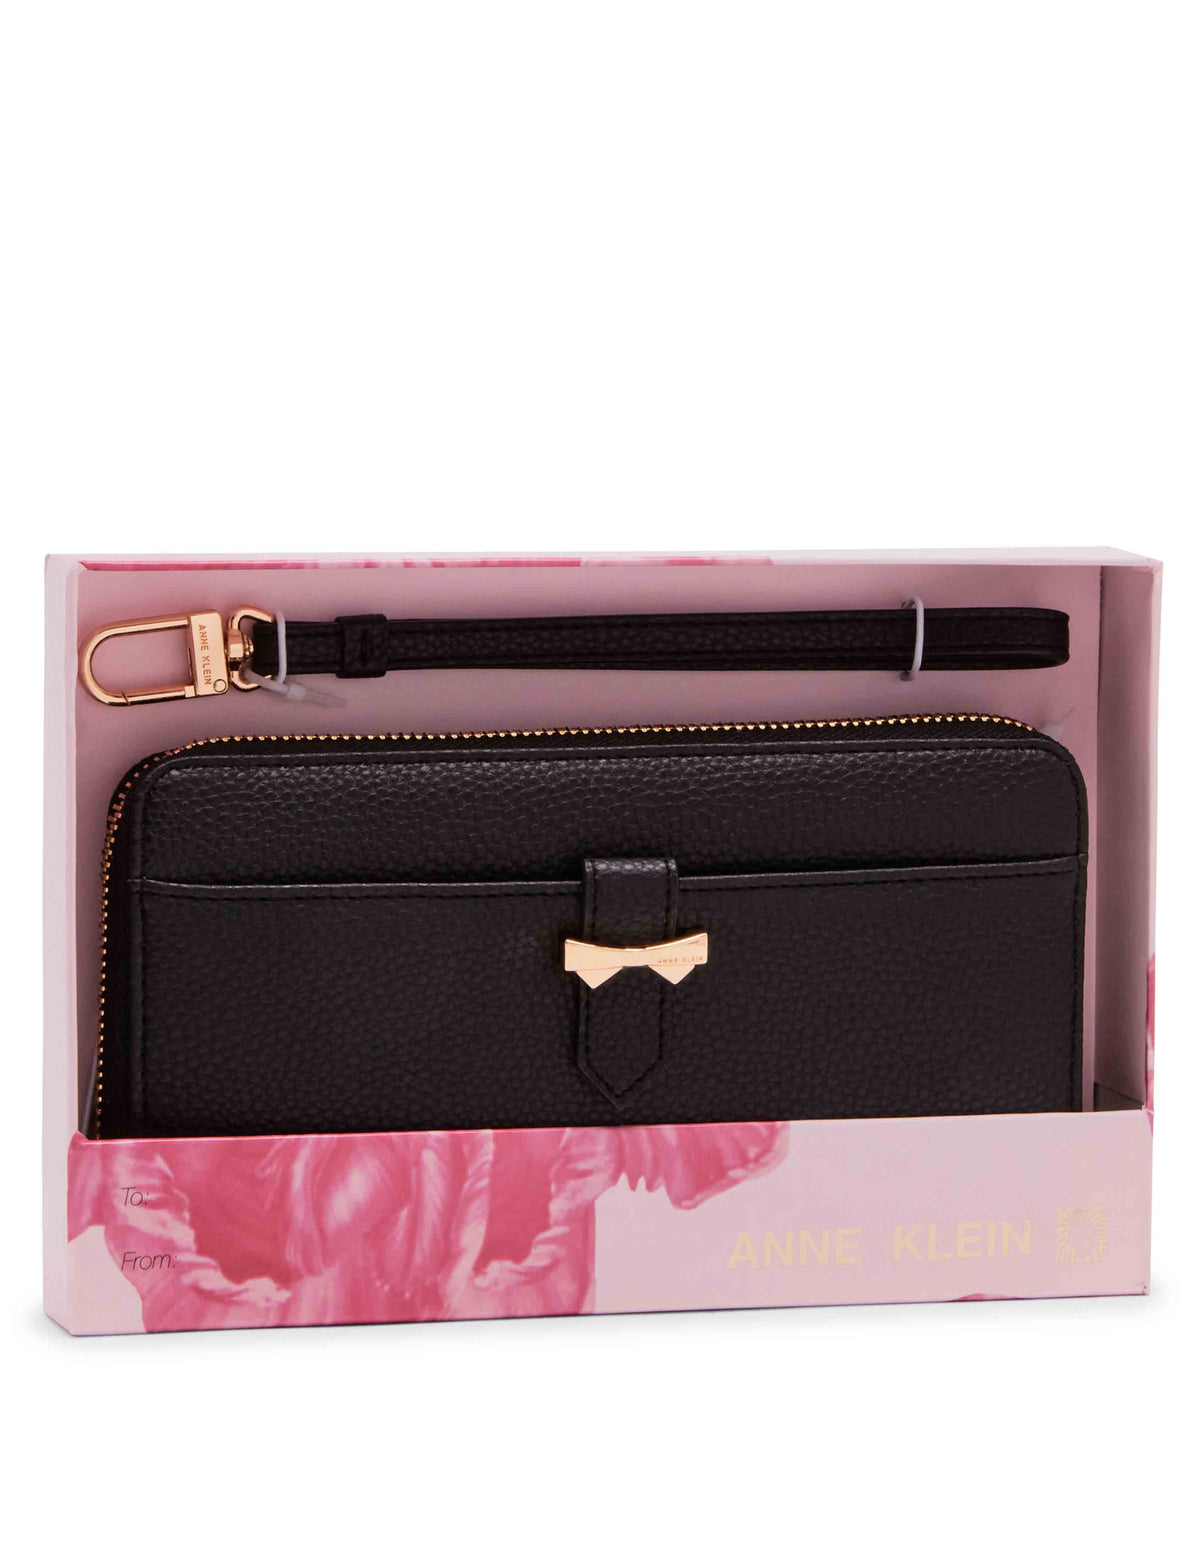 Anne Klein Black AK Boxed Slim Zip Wallet With Bow Detailing And Wristlet Strap